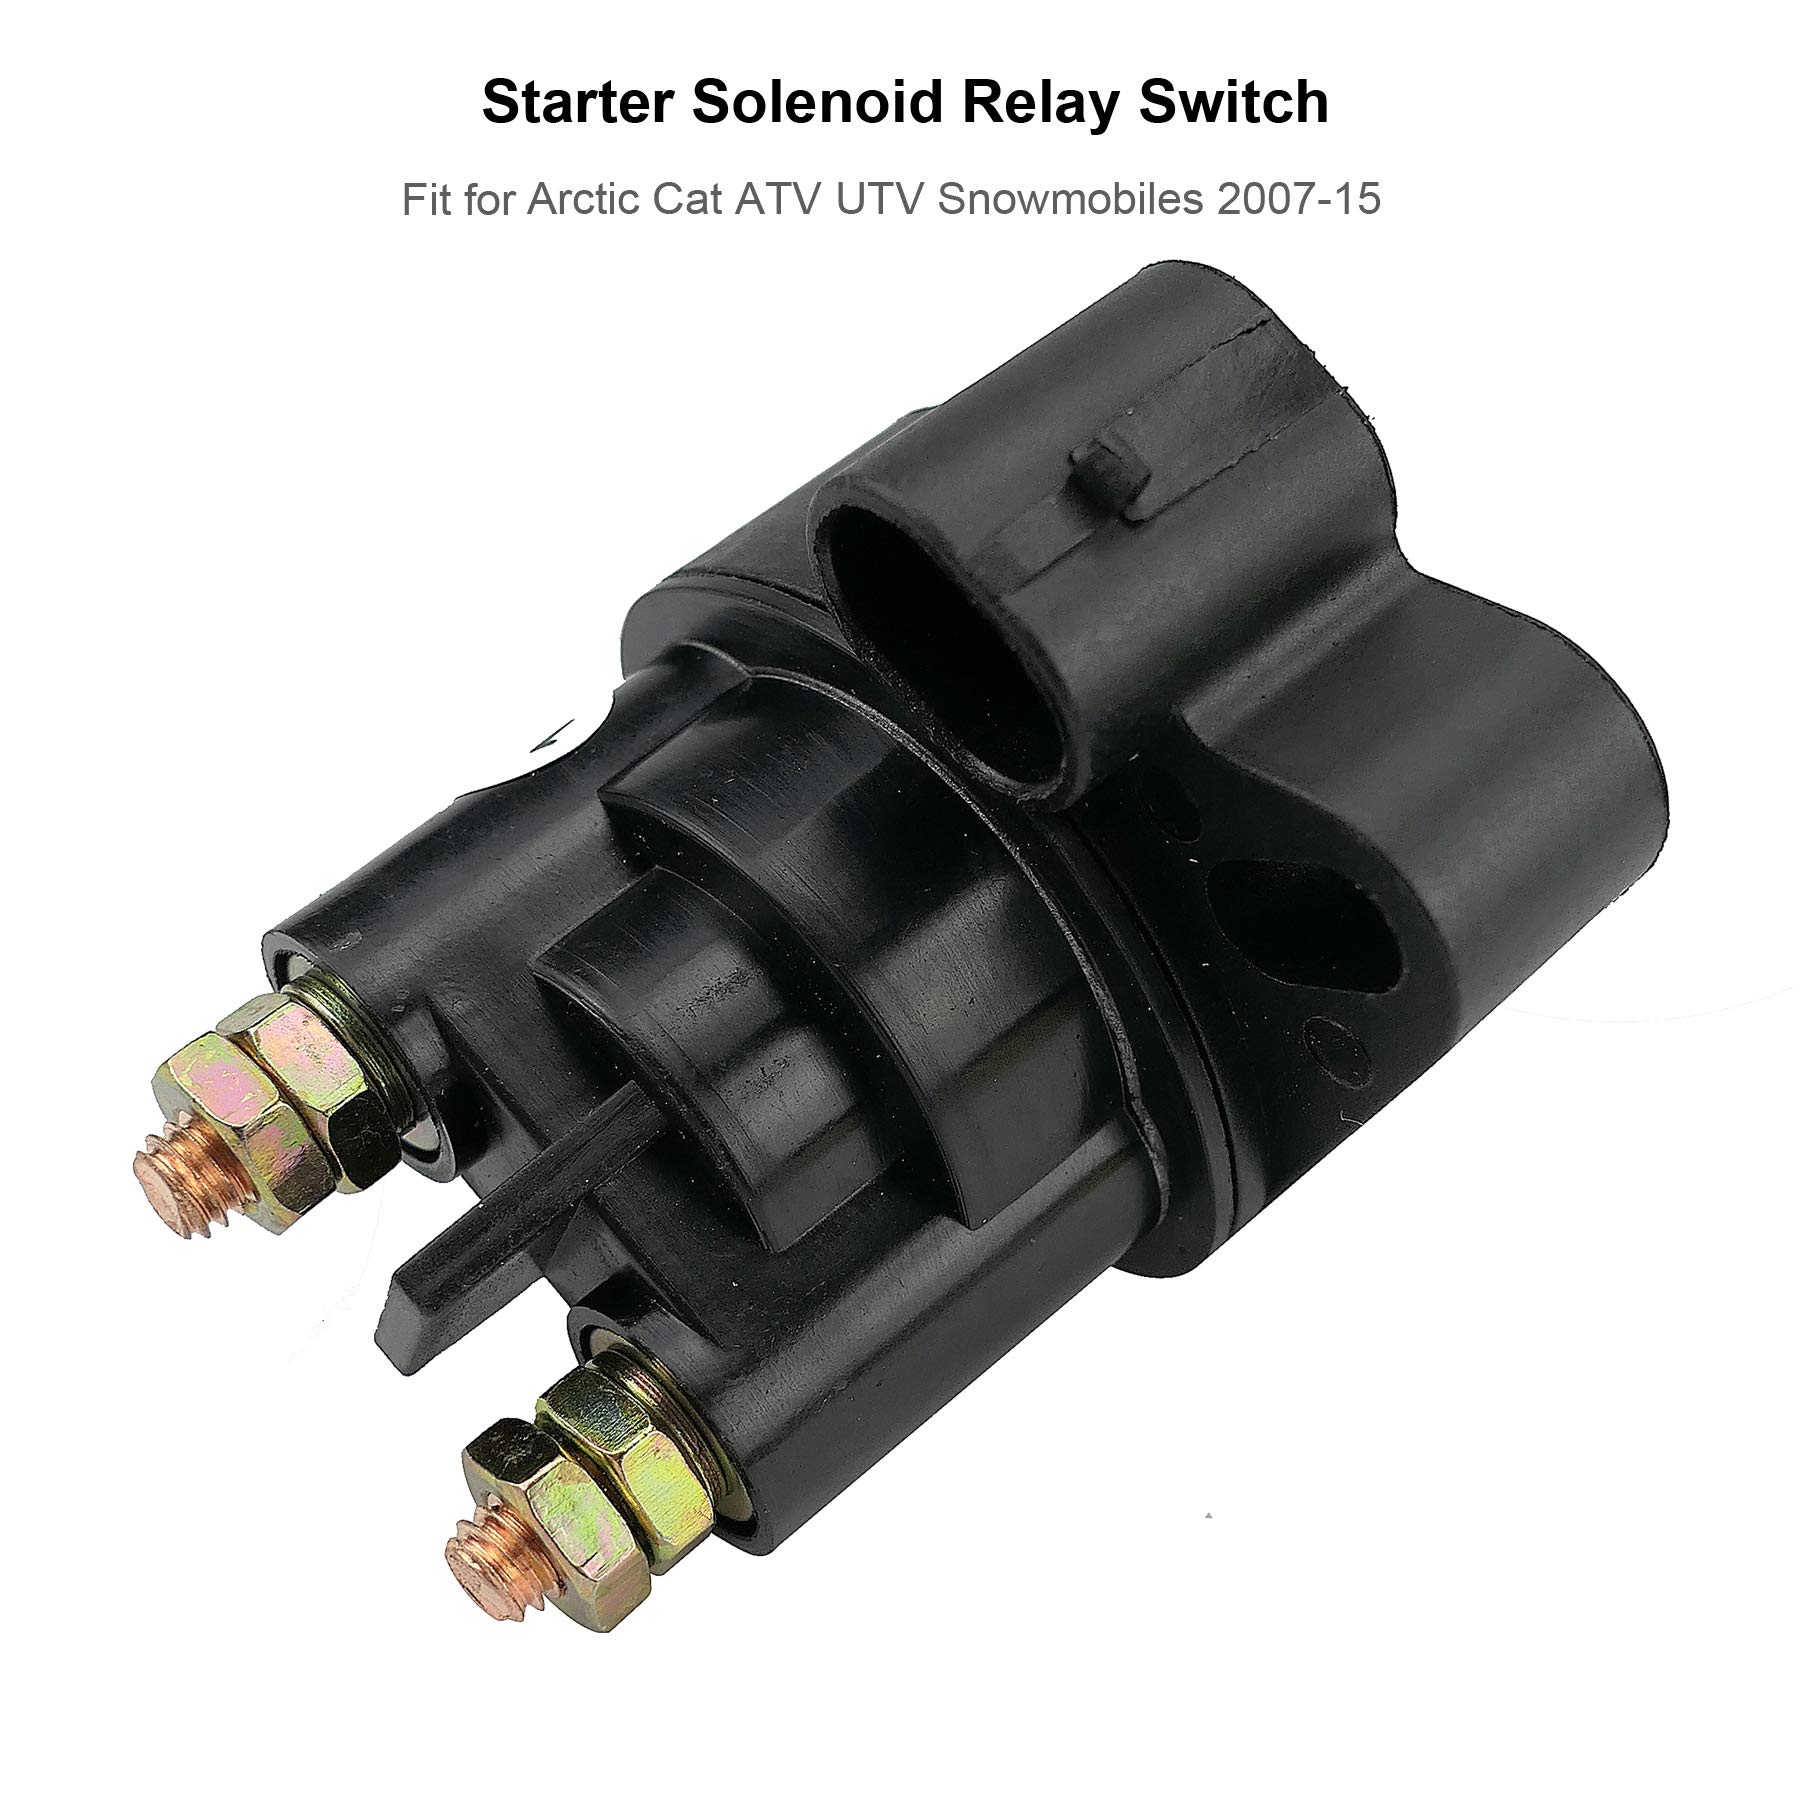 Starter Solenoid Relay Switch Fit for Arctic Cat 1000 400 450 500 550 650 700 ATV Solenoid Part Replace for 0445-058 0445-036 12 Volt 2-Terminal